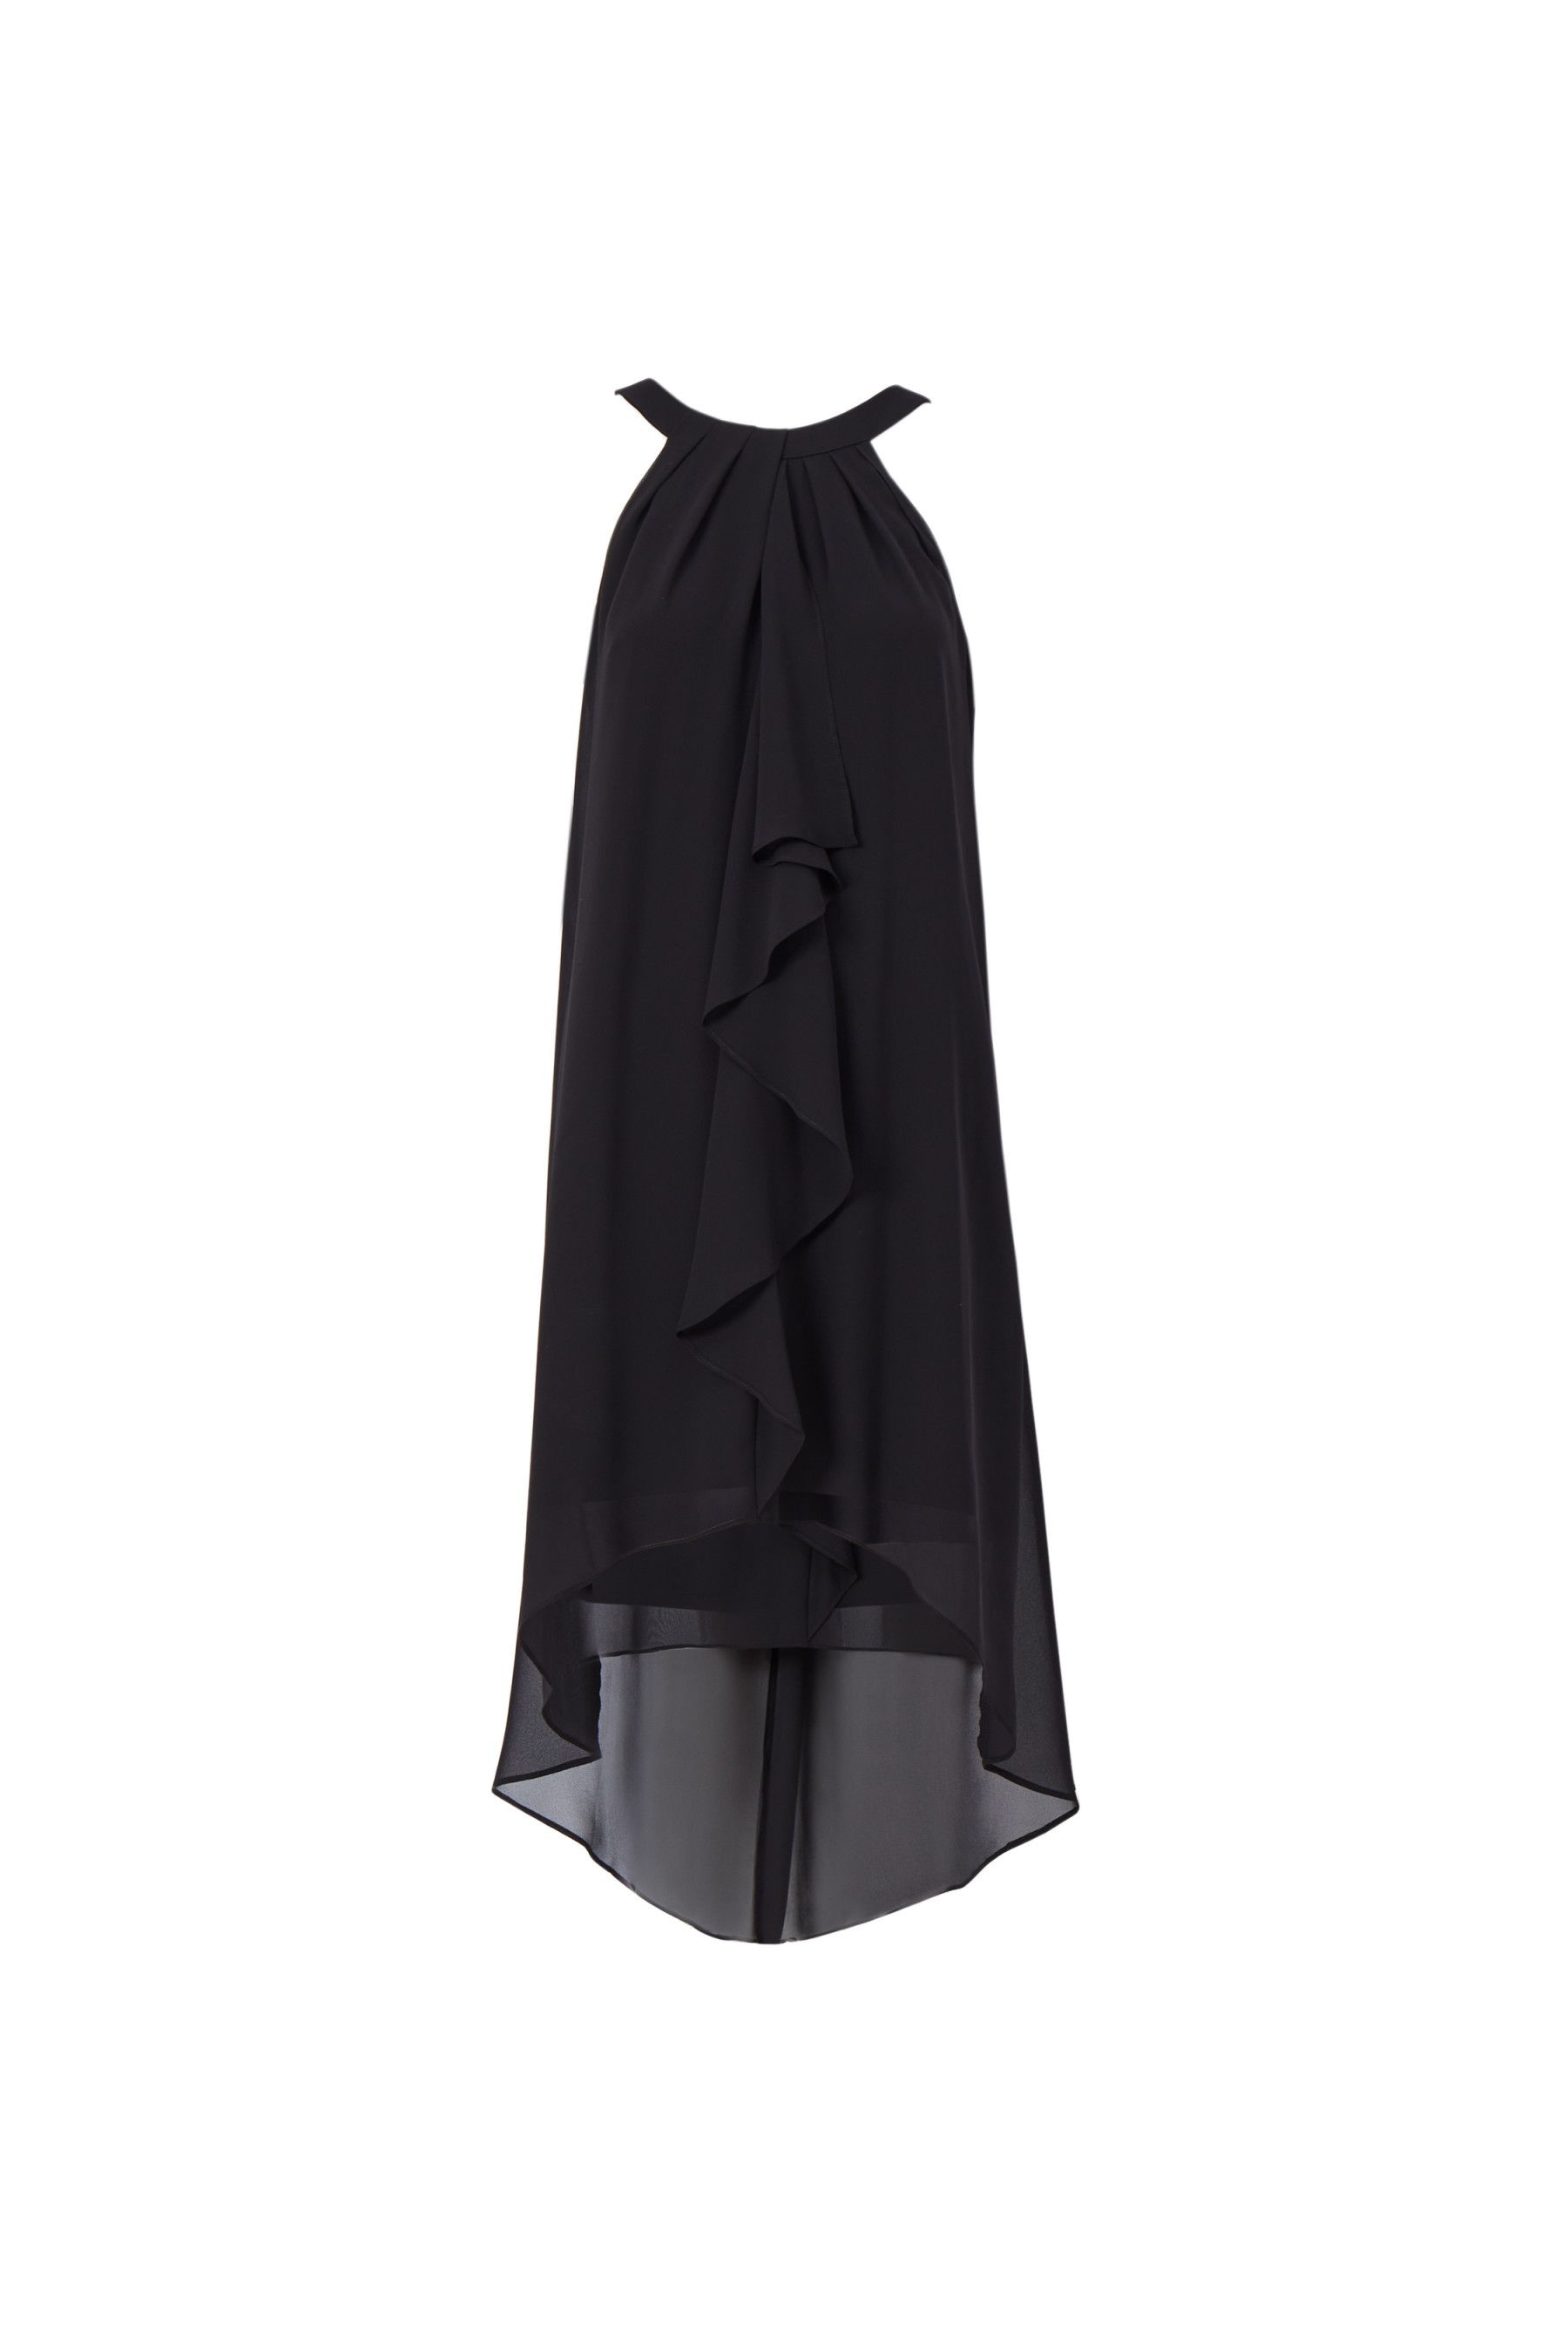 Buy Adrianna Papell Black Chiffon And Jersey Dress from the Next UK ...